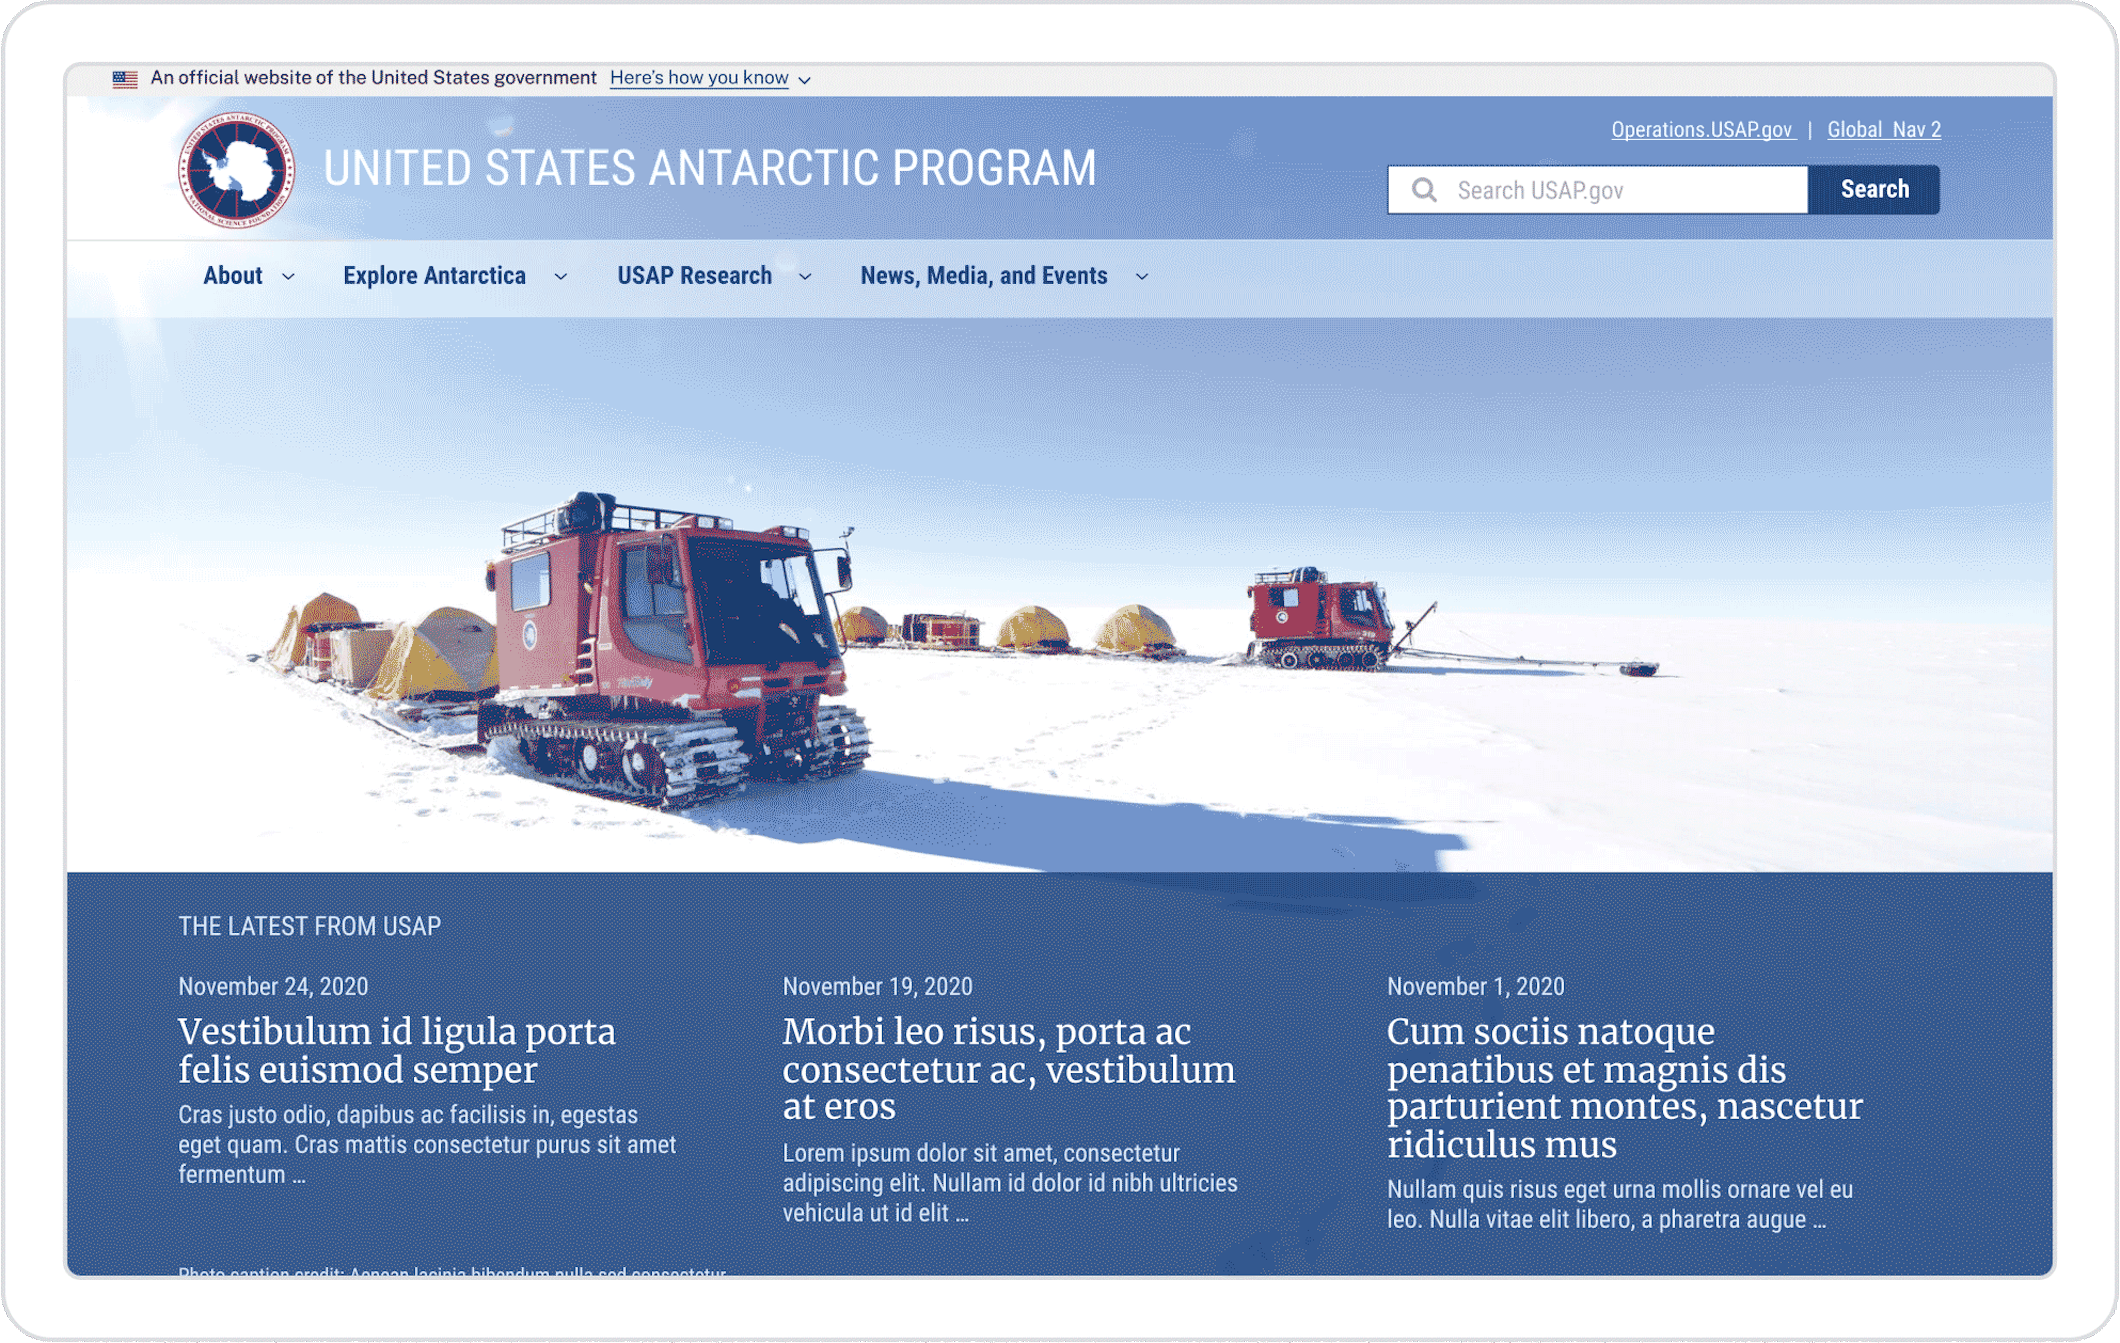 NSF website homepage with rotating images of the team traveling across ice fields, penguins, and ice cliffs.